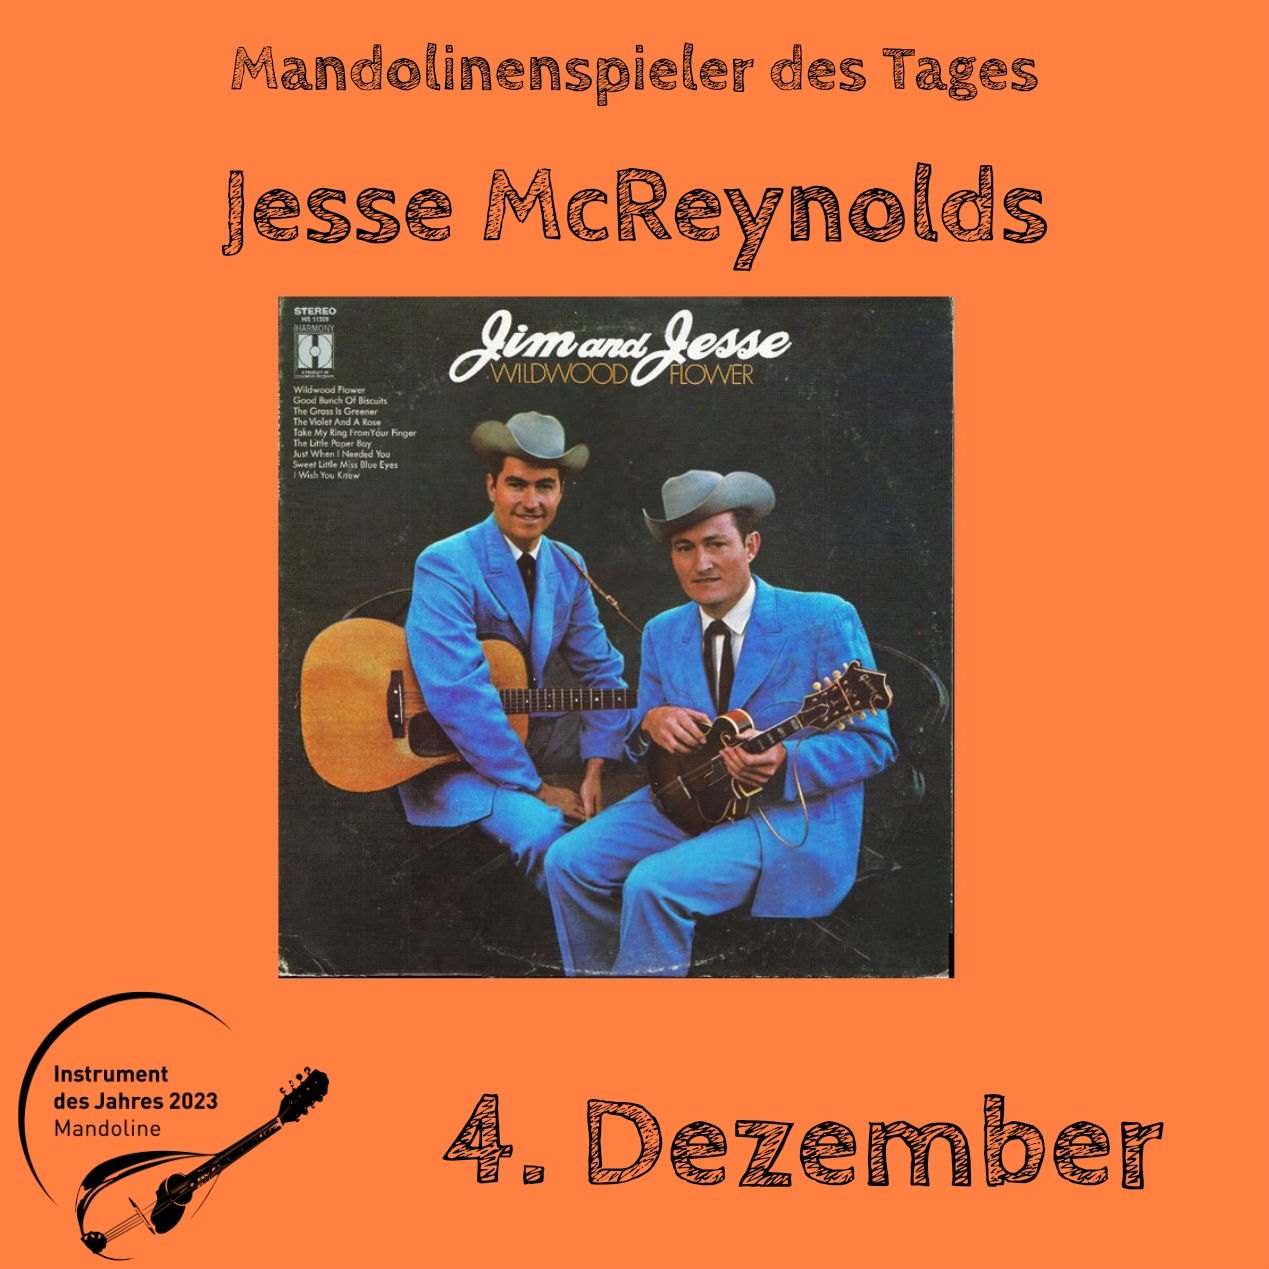 You are currently viewing 4. Dezember – Jesse McReynolds